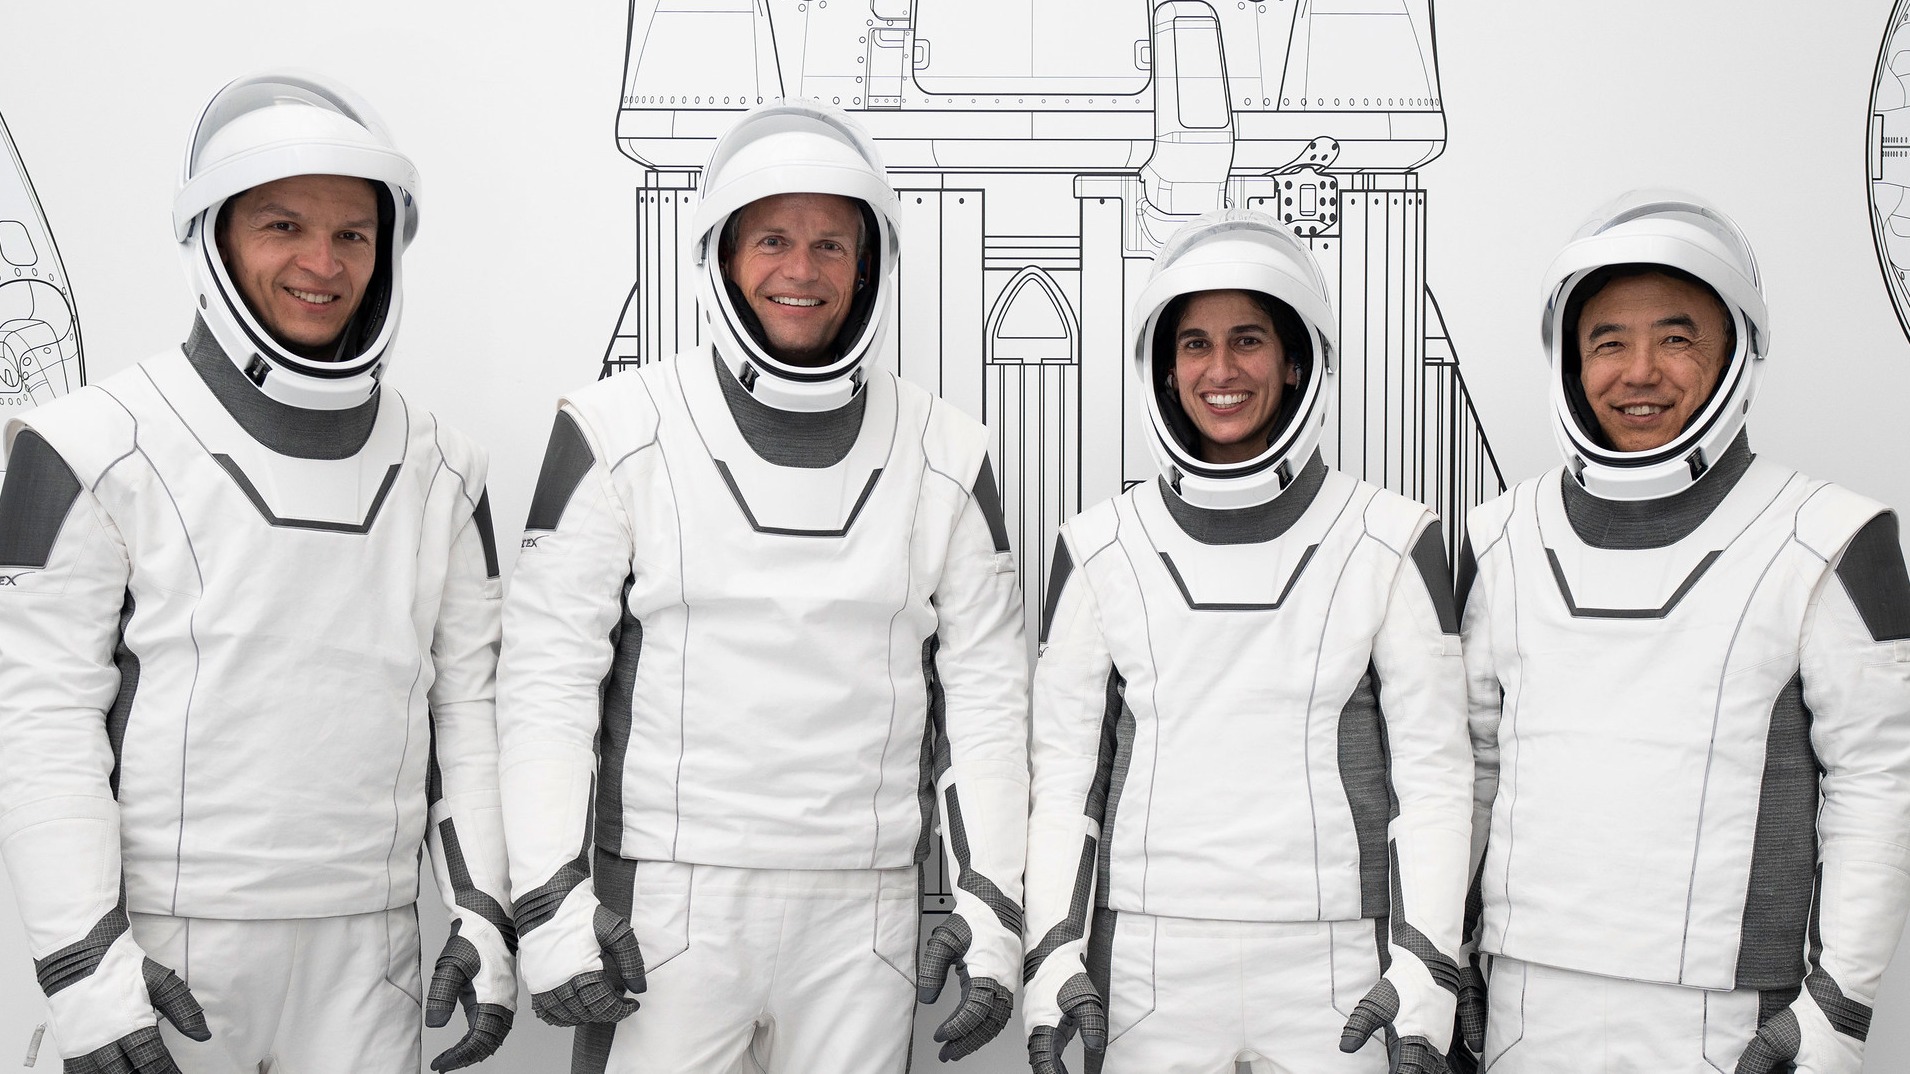 four astronauts standing in a row in spacesuits, smiling. a line drawing of a rocket is behind them